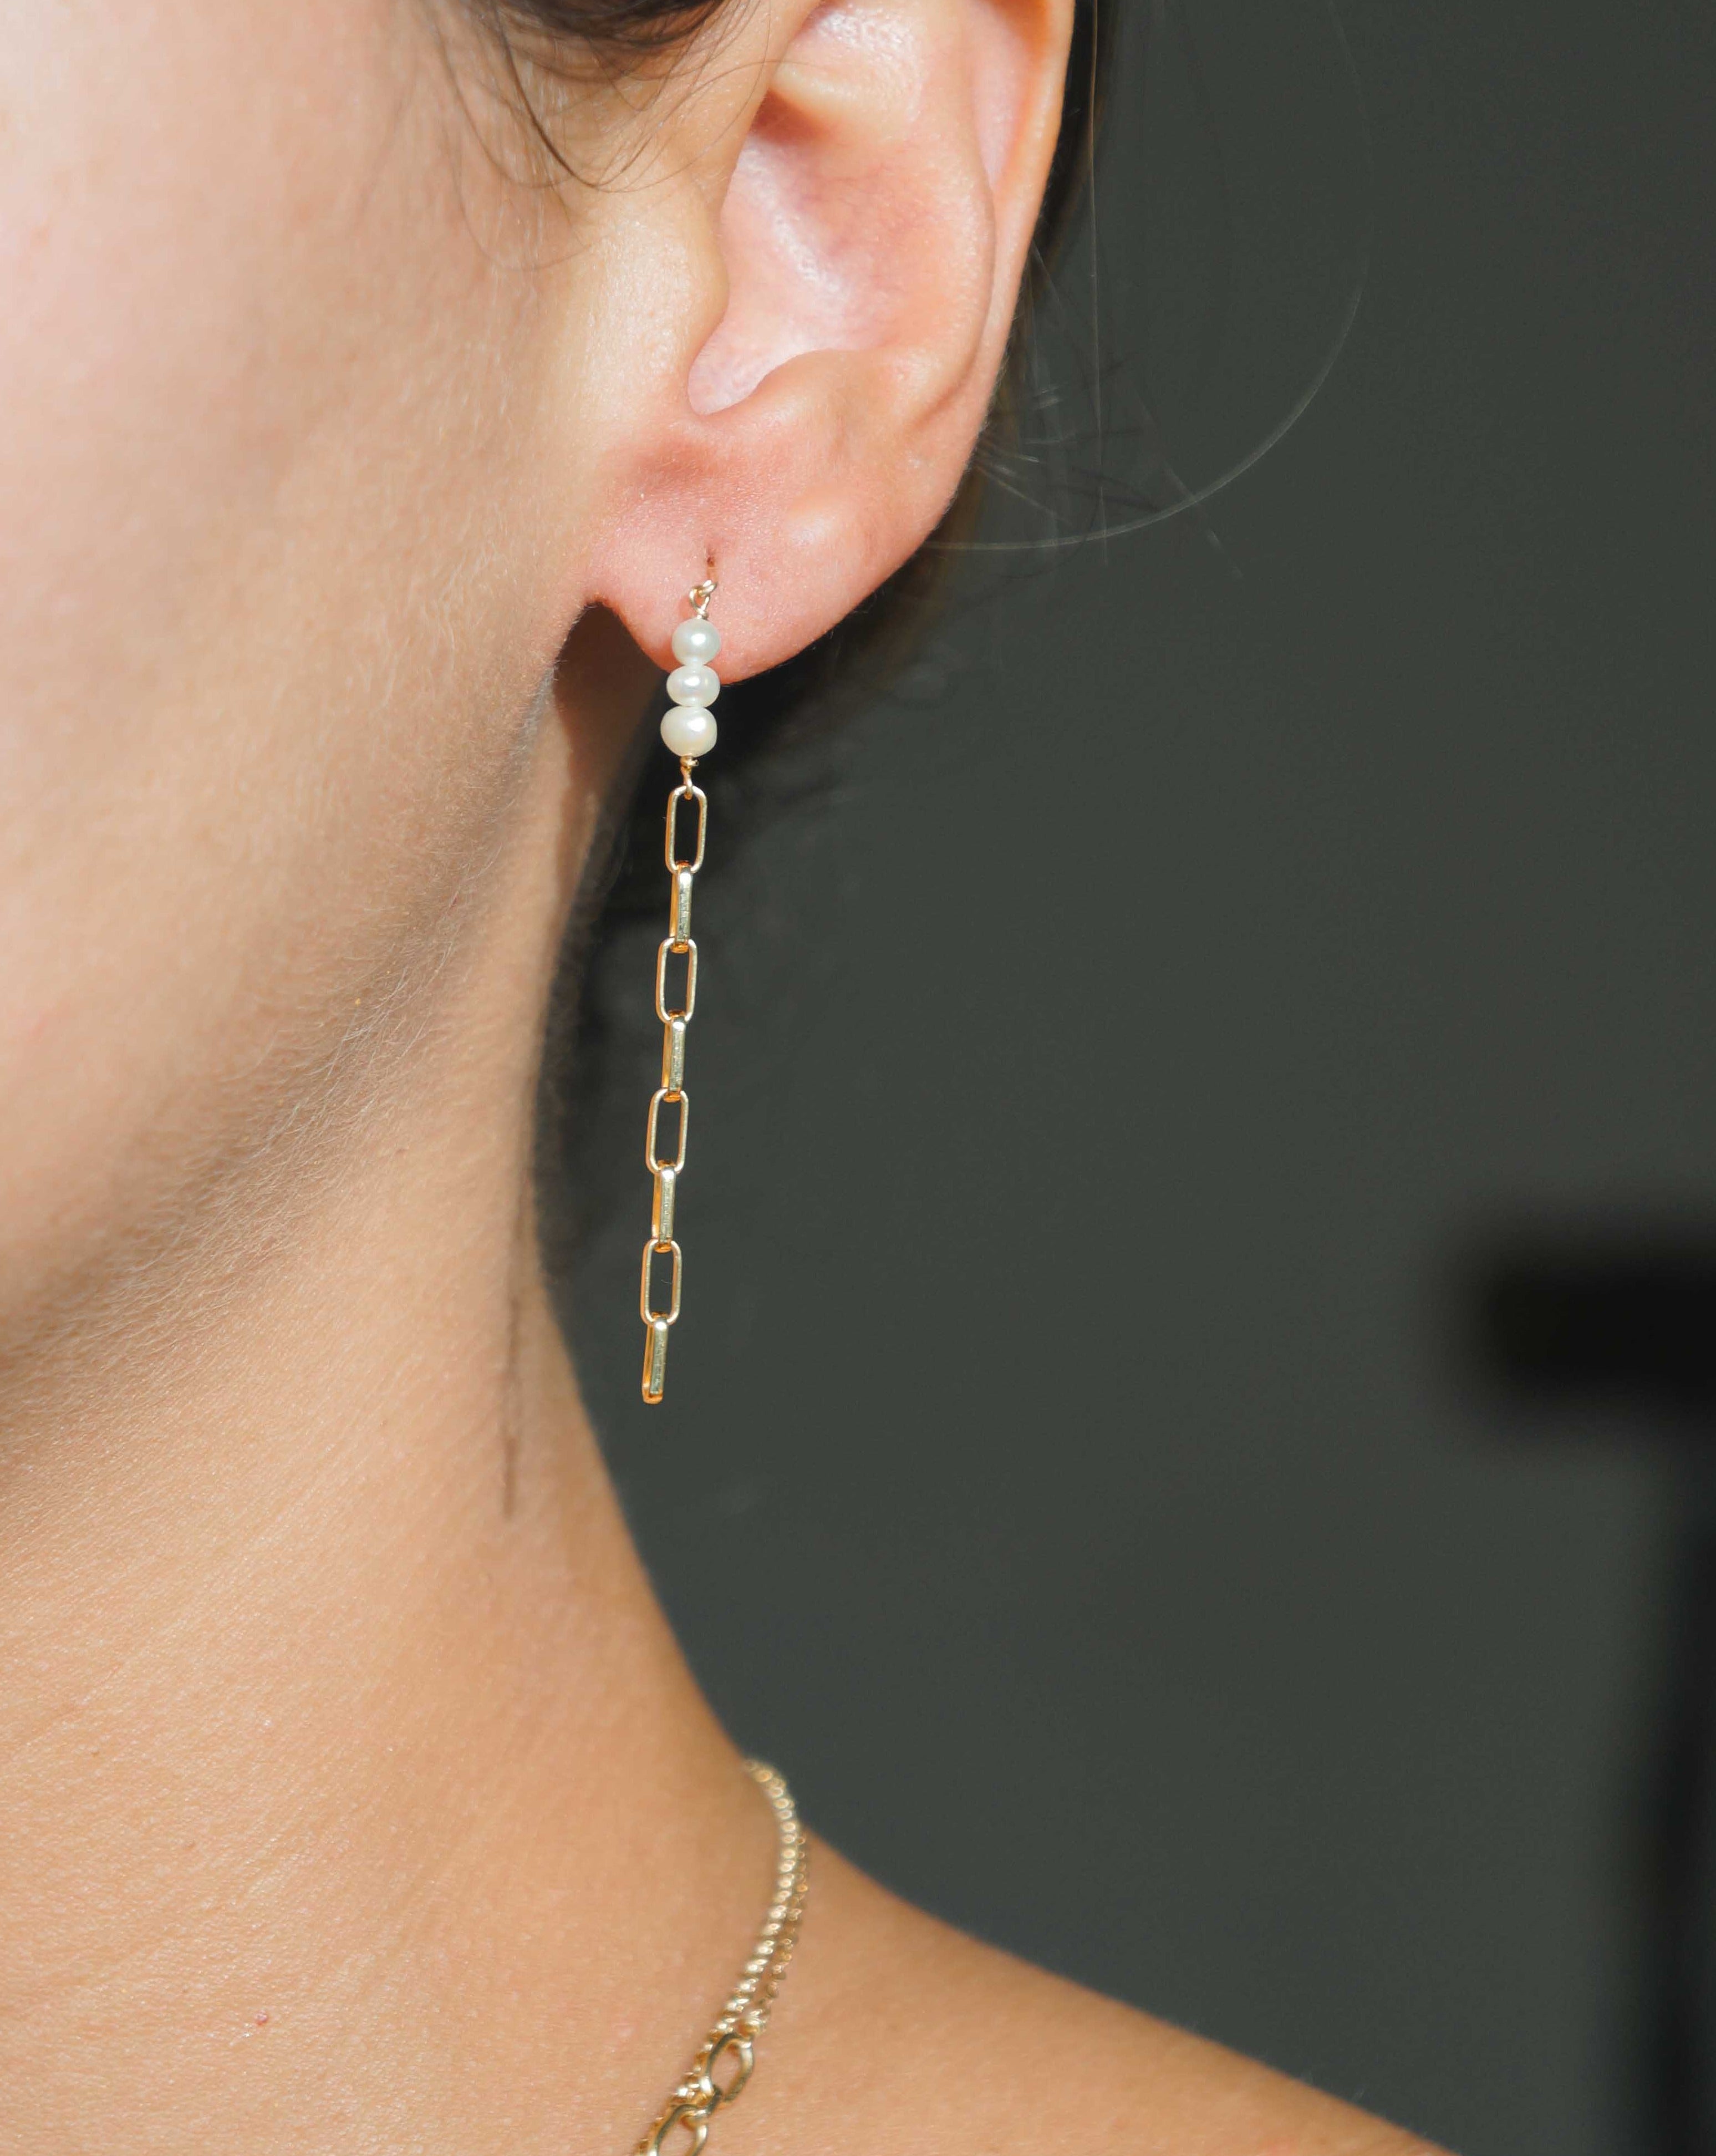 Anaisha Earrings by Kozakh. Chain style drop earrings in 14K Gold Filled with 5mm round Pearls.